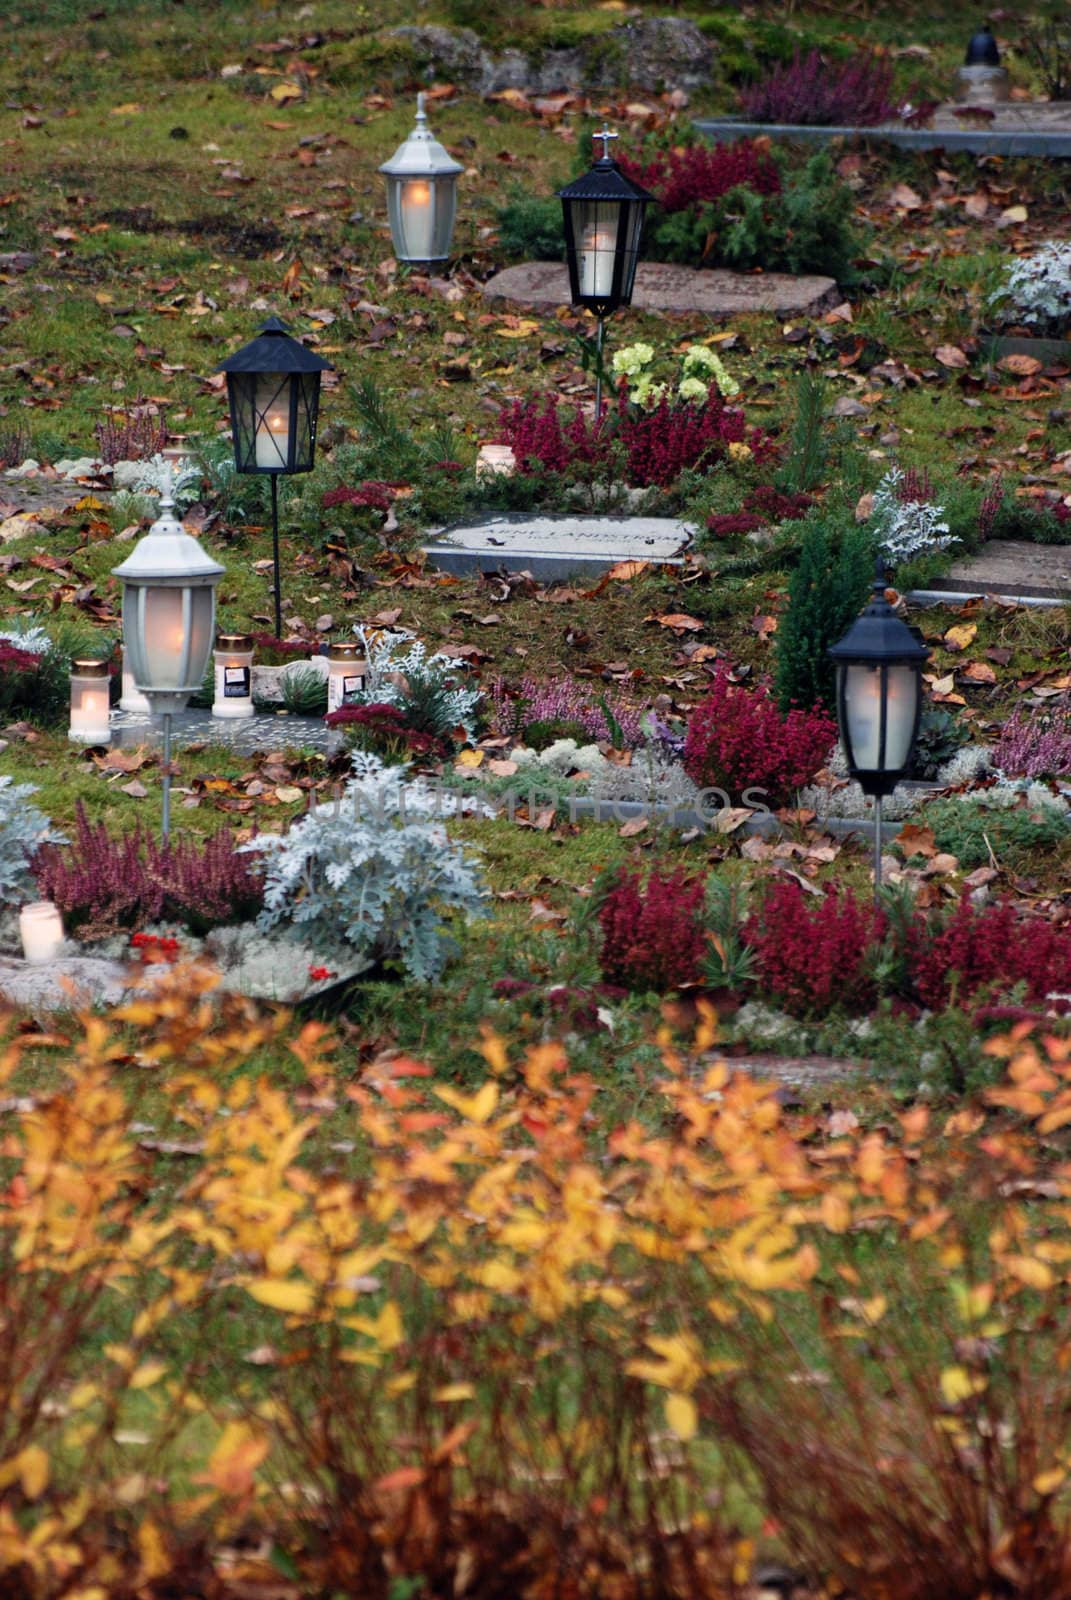 Graves at a cemetery by ljusnan69